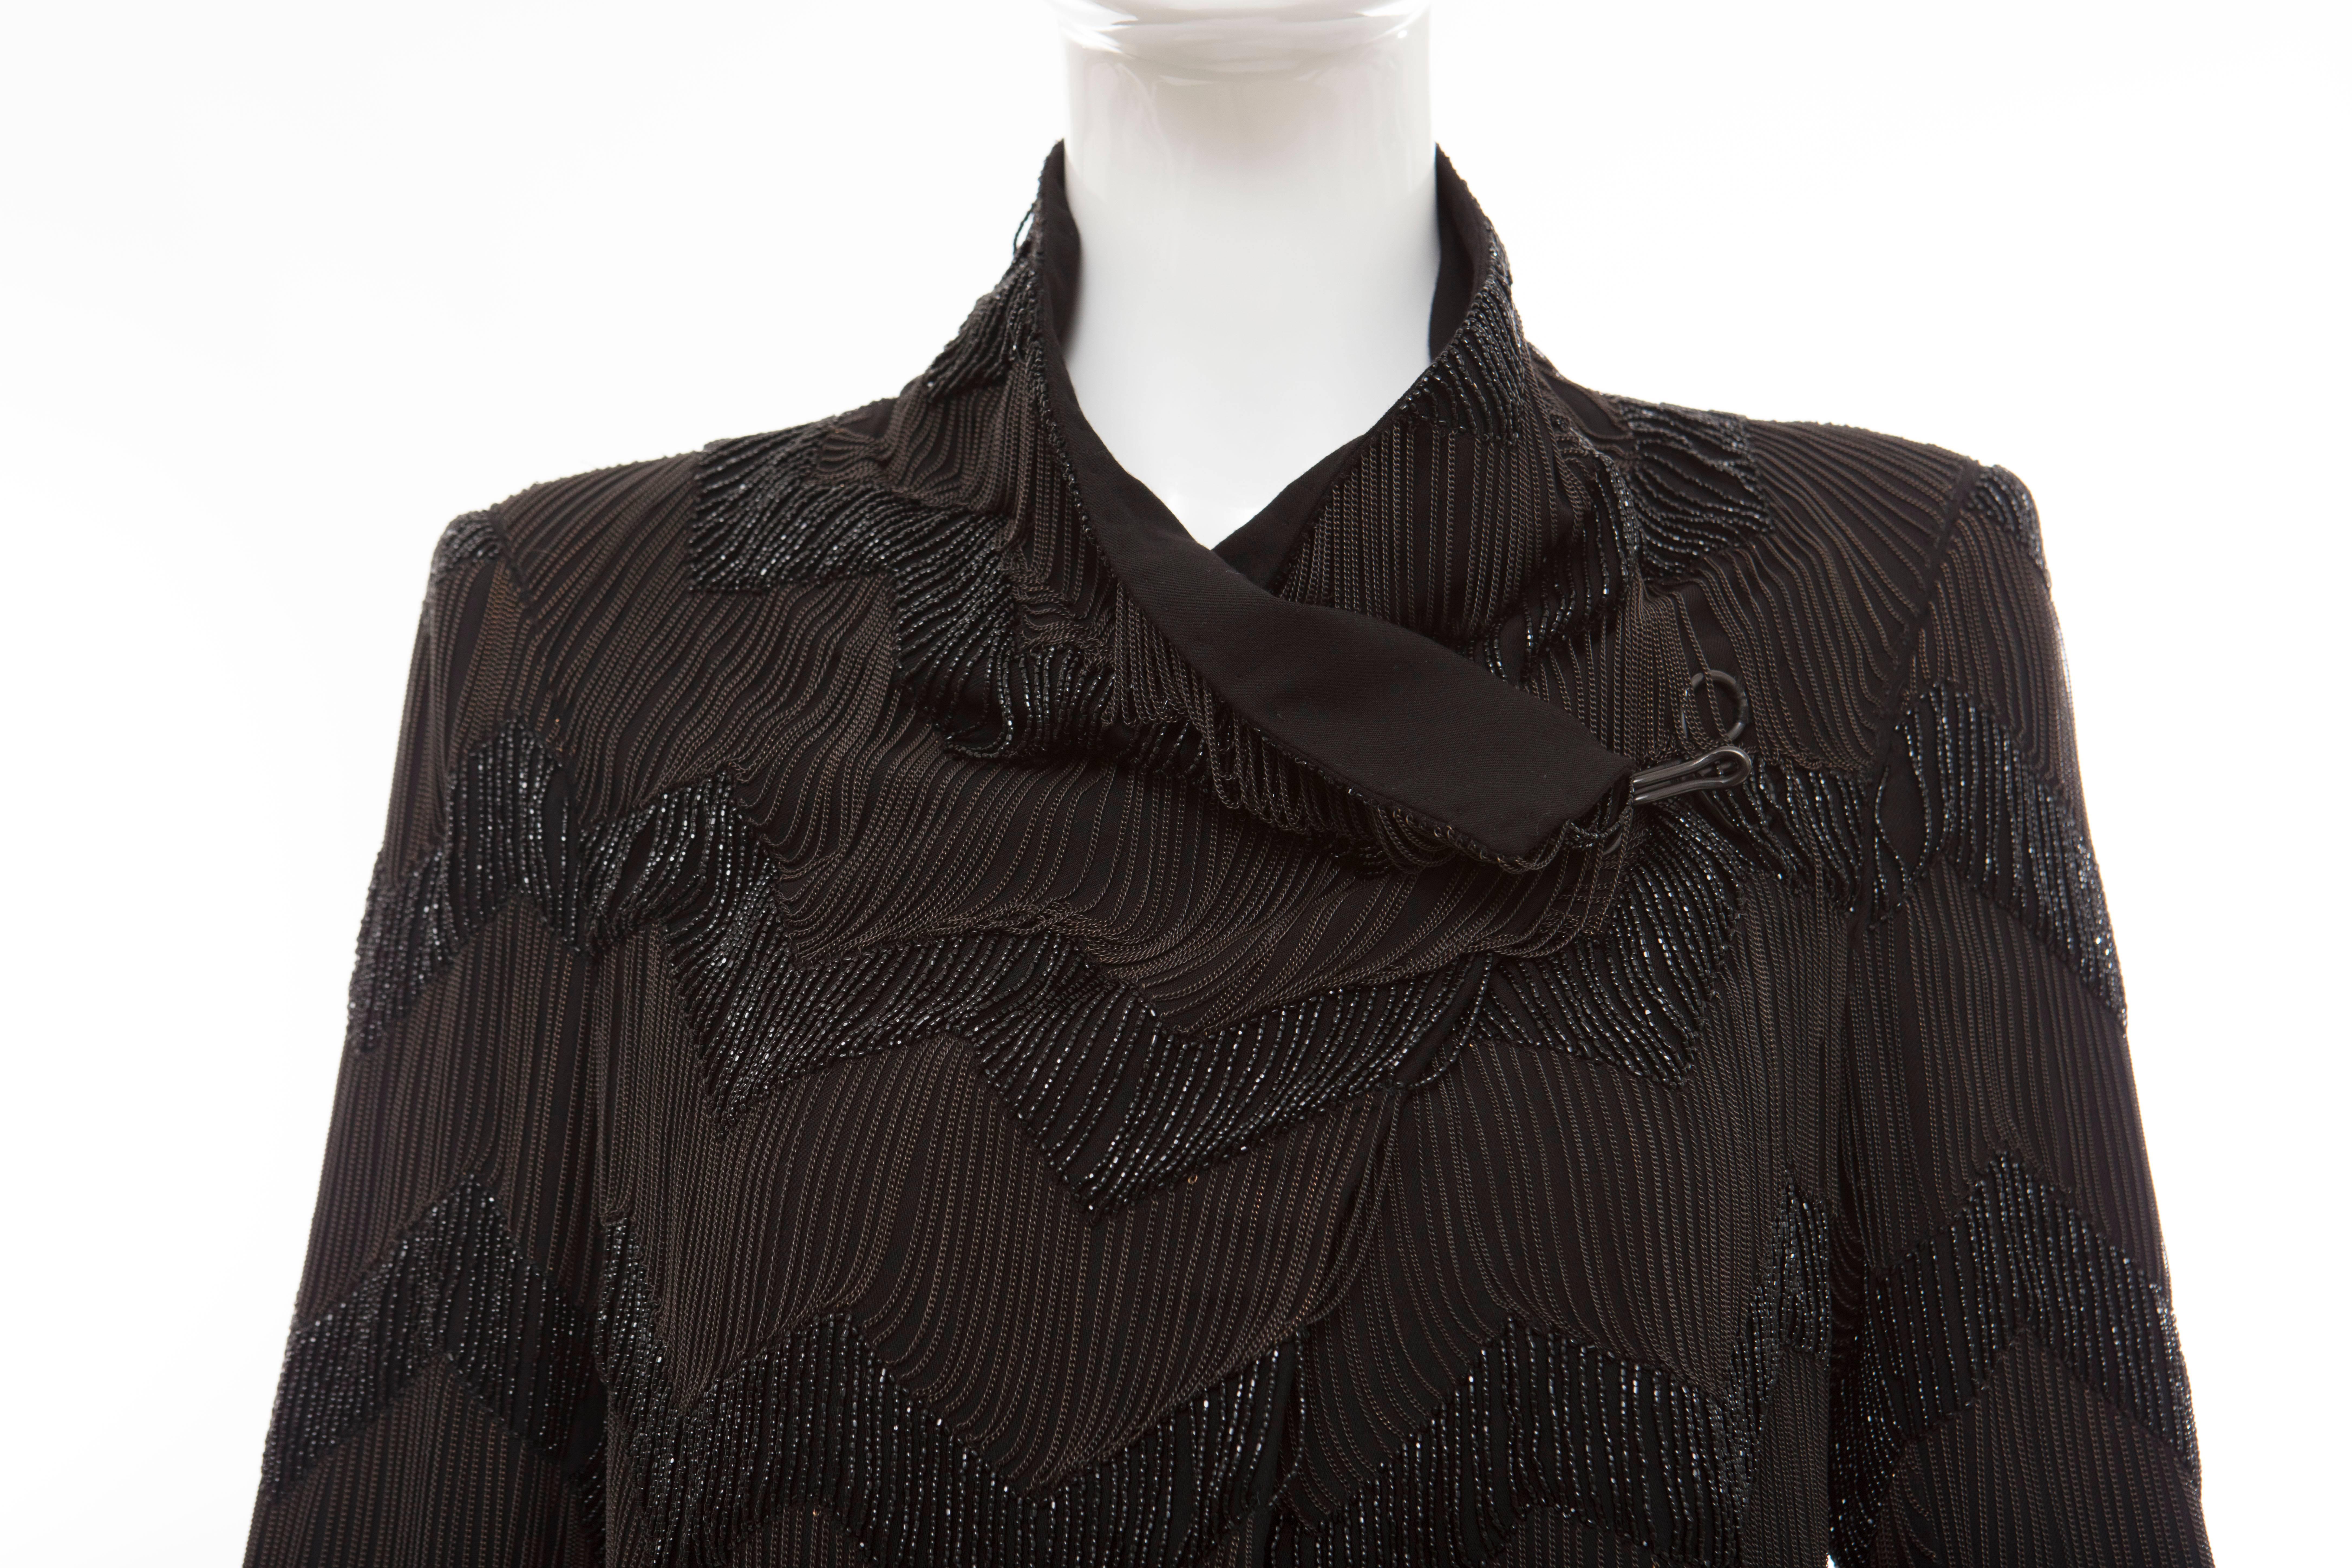 Ann Demeulemeester Runway Black Wool Chain And Beaded Jacket, Fall 2011 For Sale 1